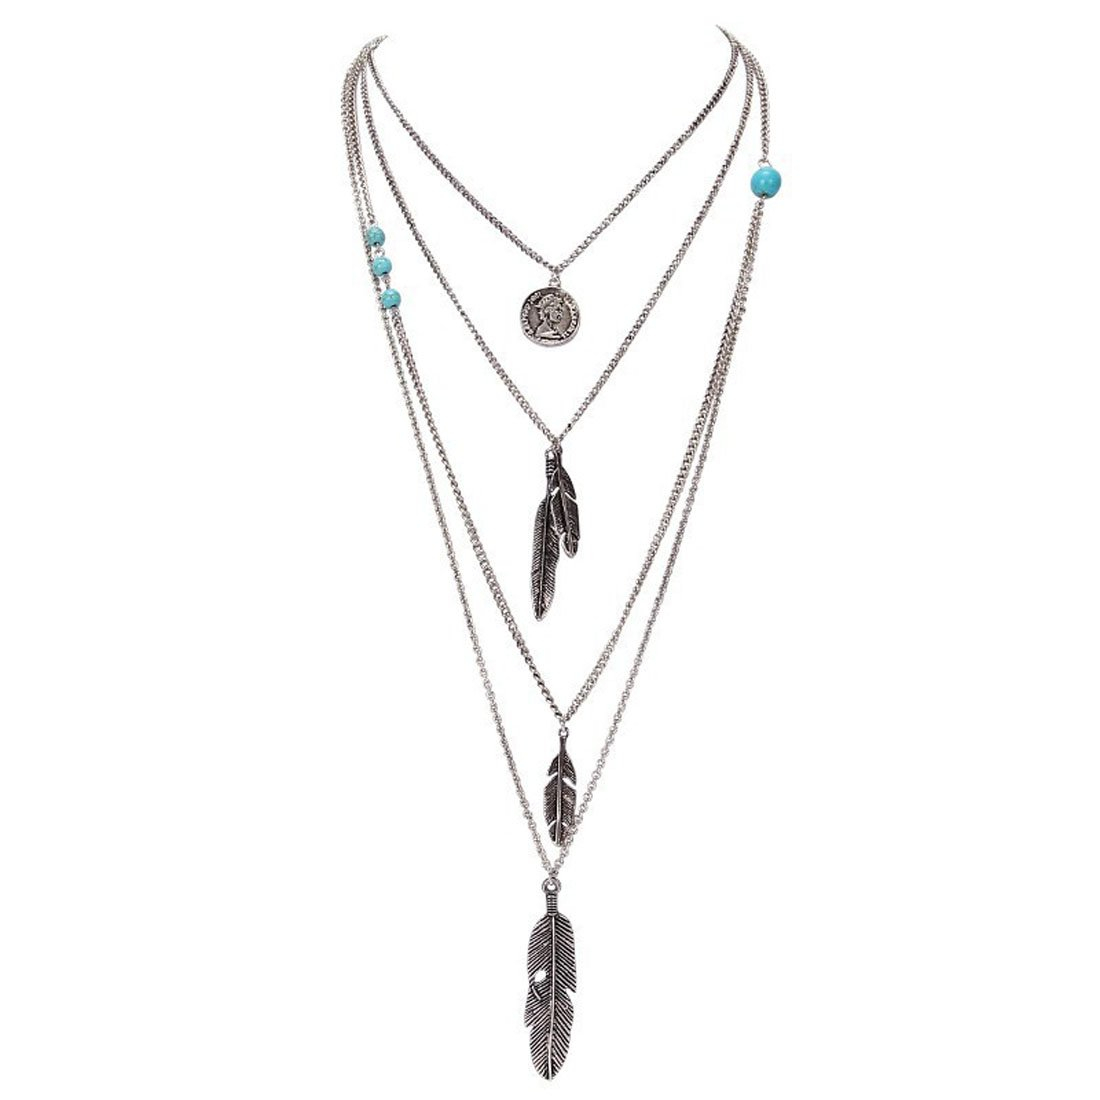 w-82 women's turquoise necklace bohemian 3-layer necklace set Feathered long girl necklace